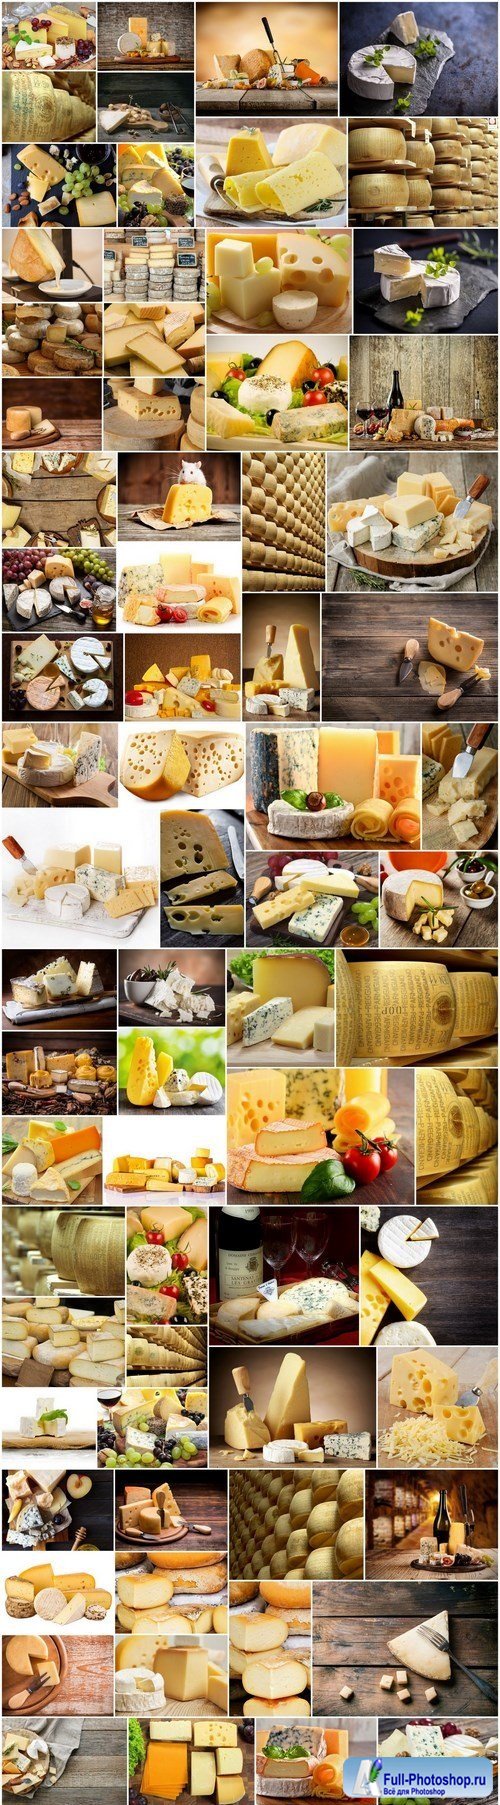 Different cheeses varieties - 76xUHQ JPEG